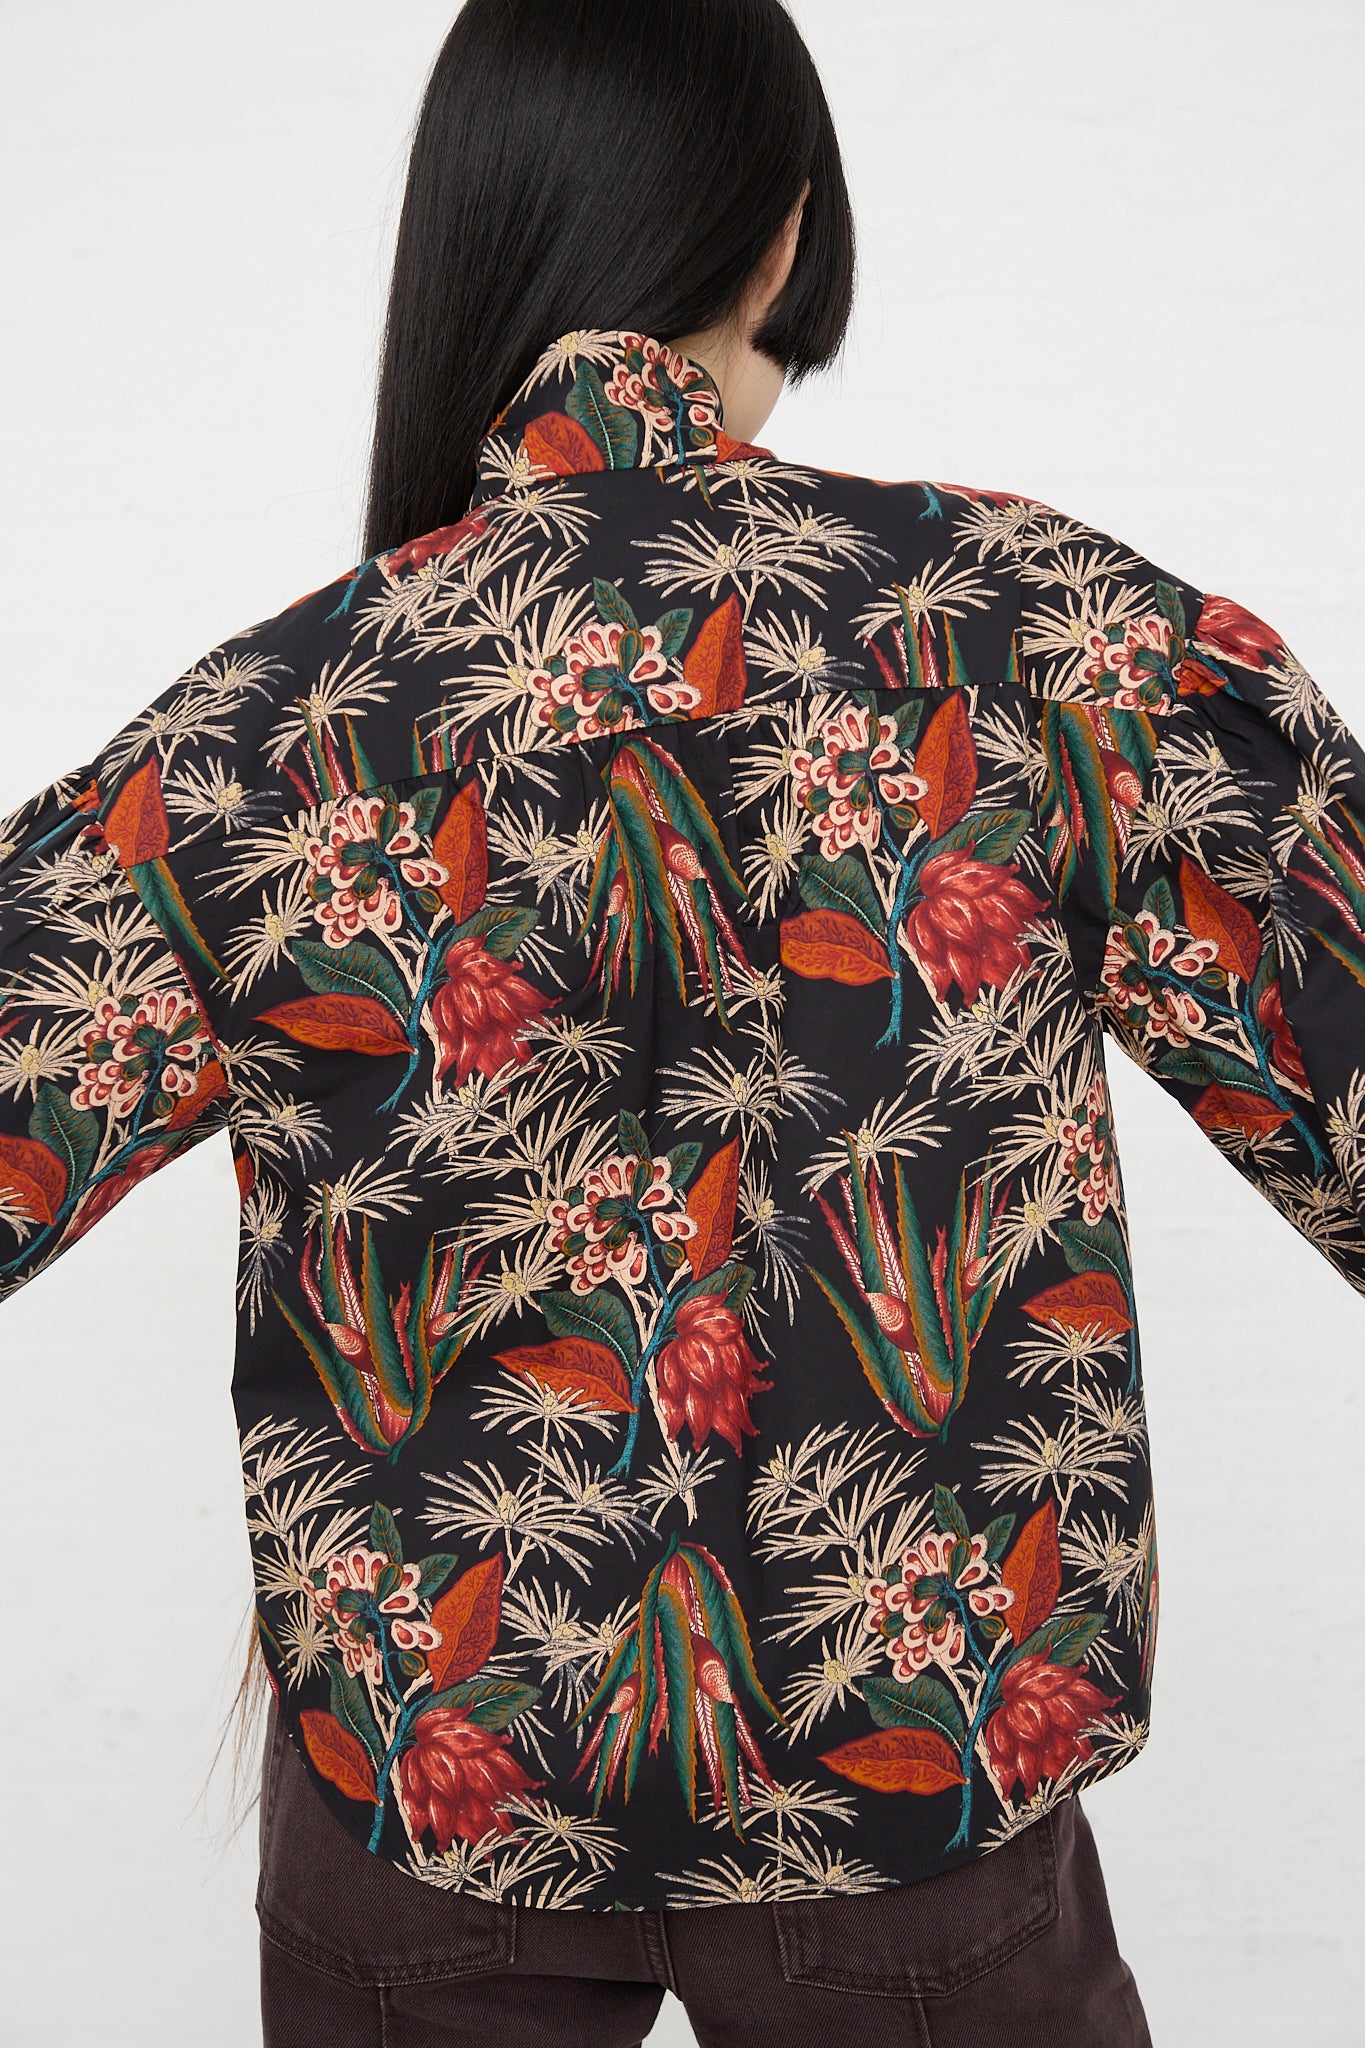 Back view of a model wearing the Ulla Johnson Alberta Blouse in Anthurium print.